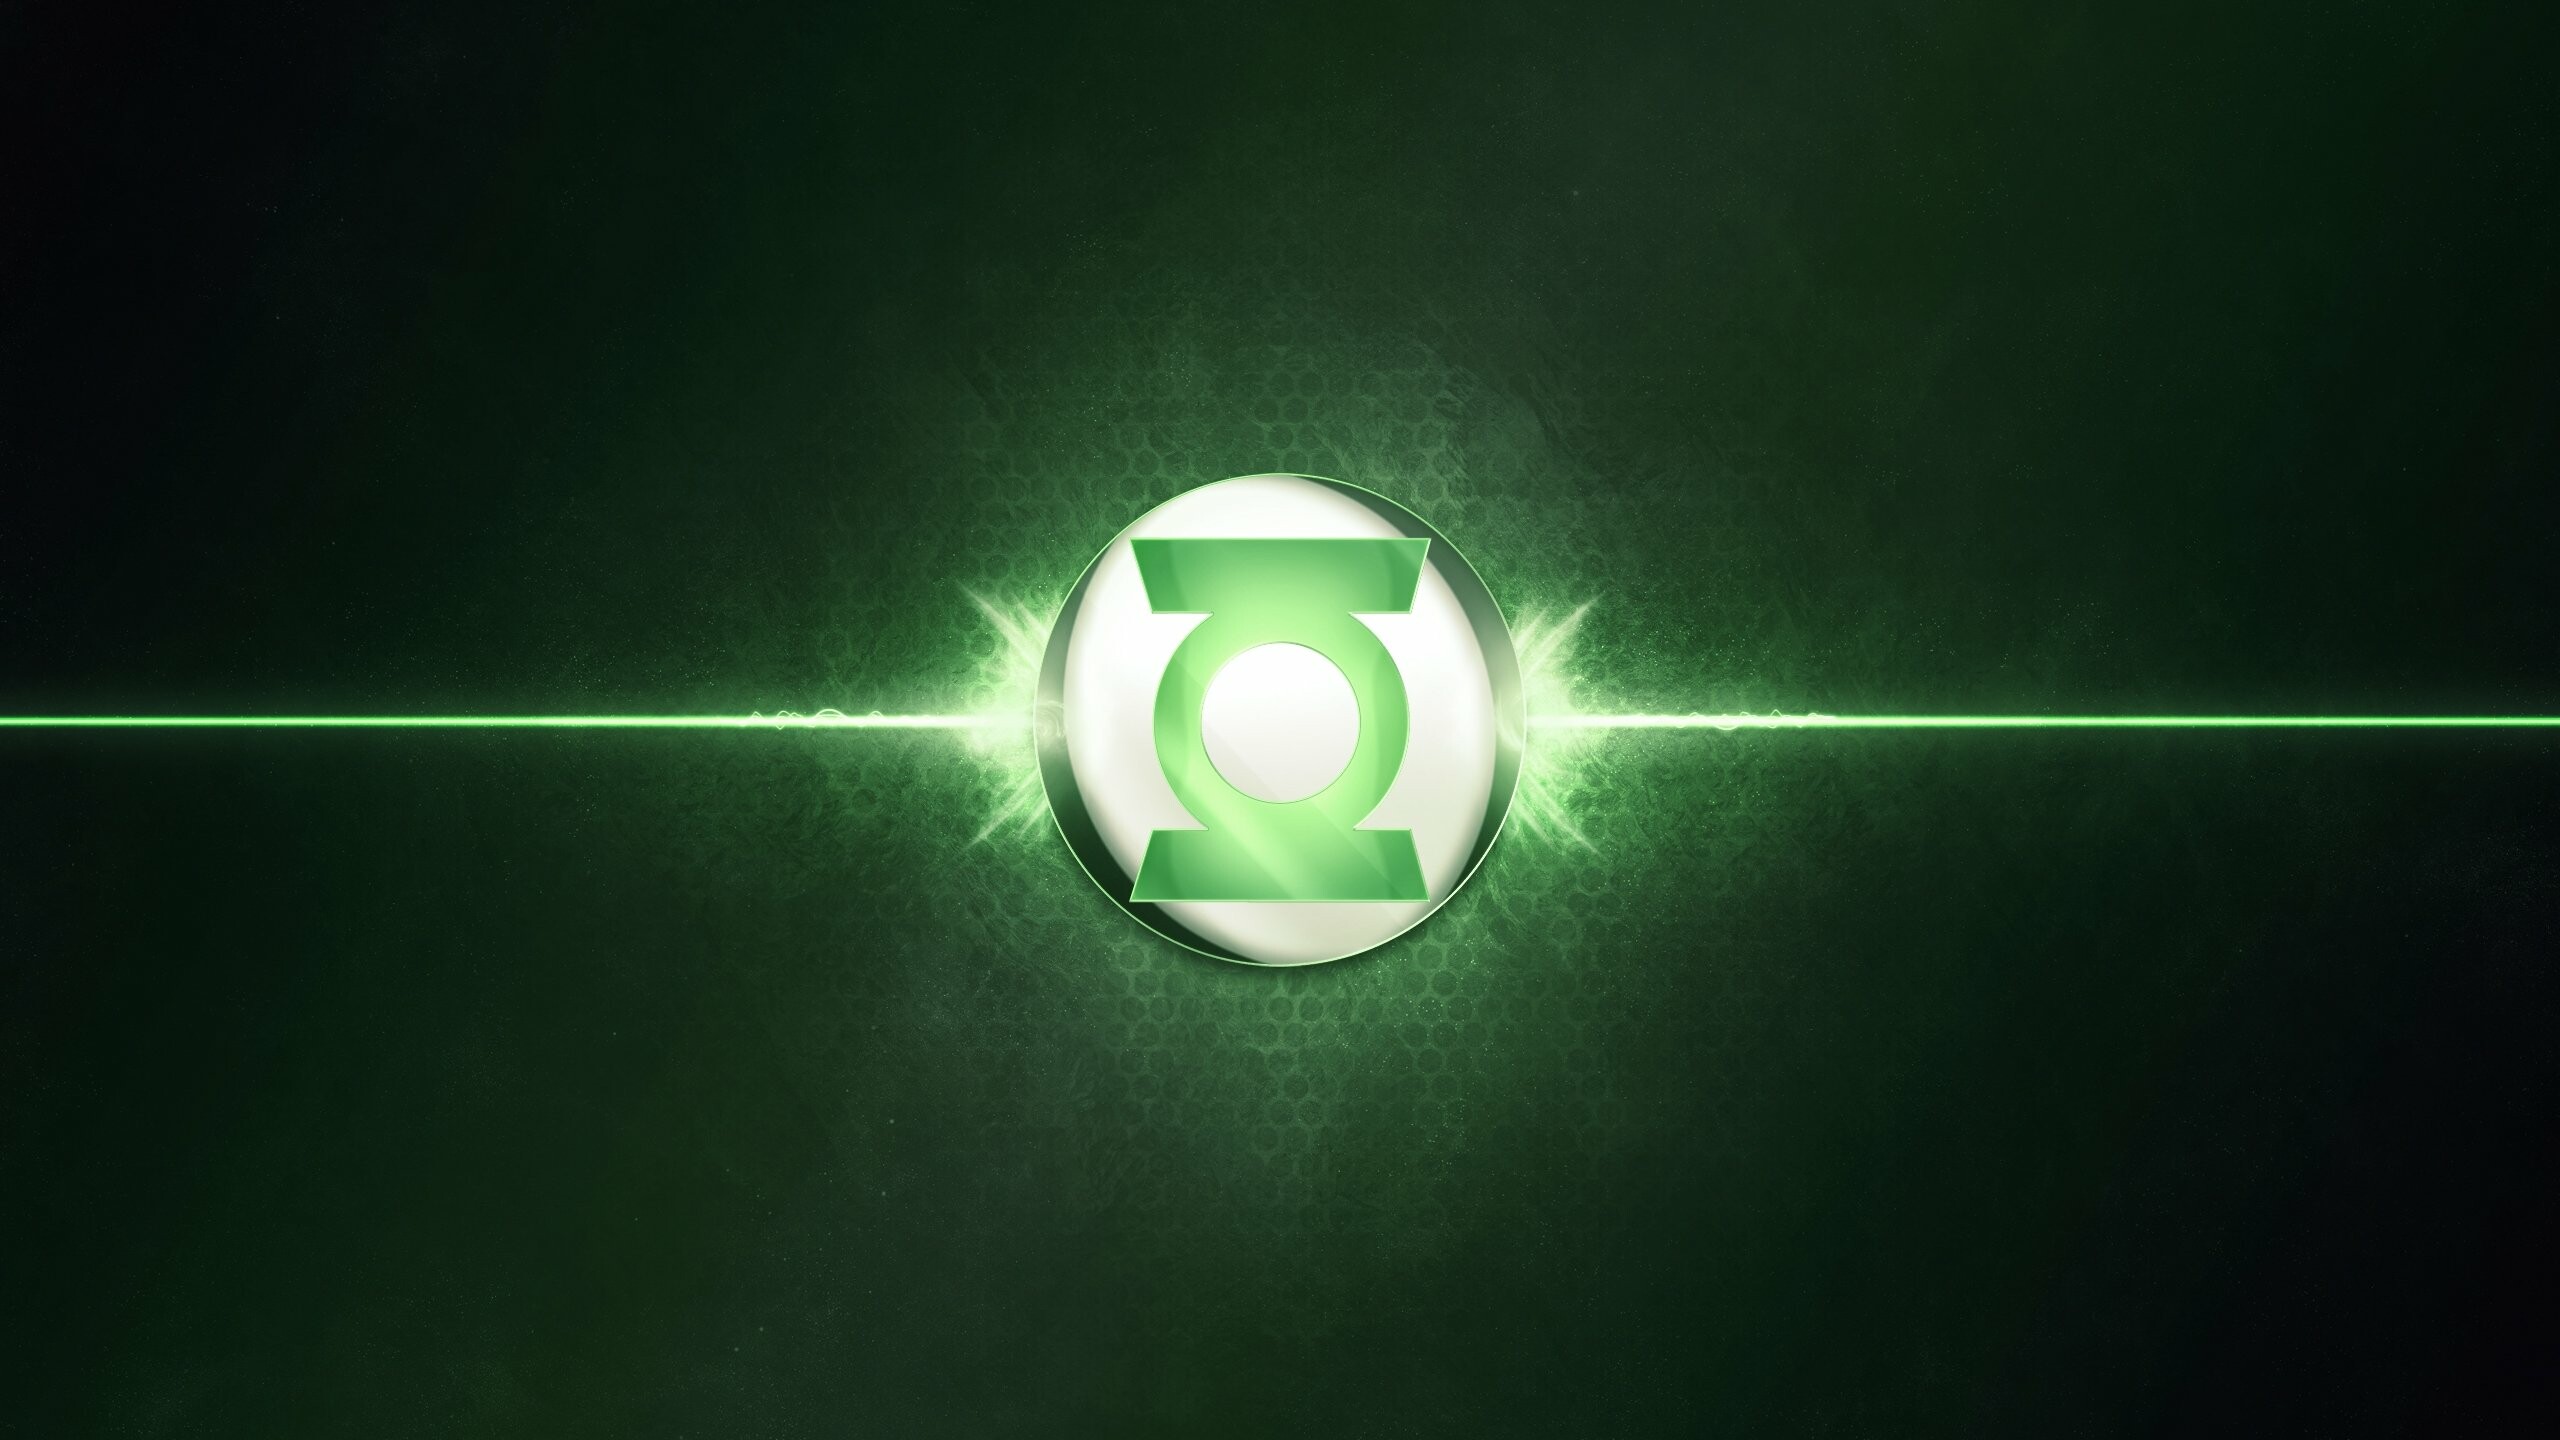 Green Lantern: The keeper of the peace in the universe, A standing army of 7,200 members patrolling 3,600 sectors of space. 2560x1440 HD Background.